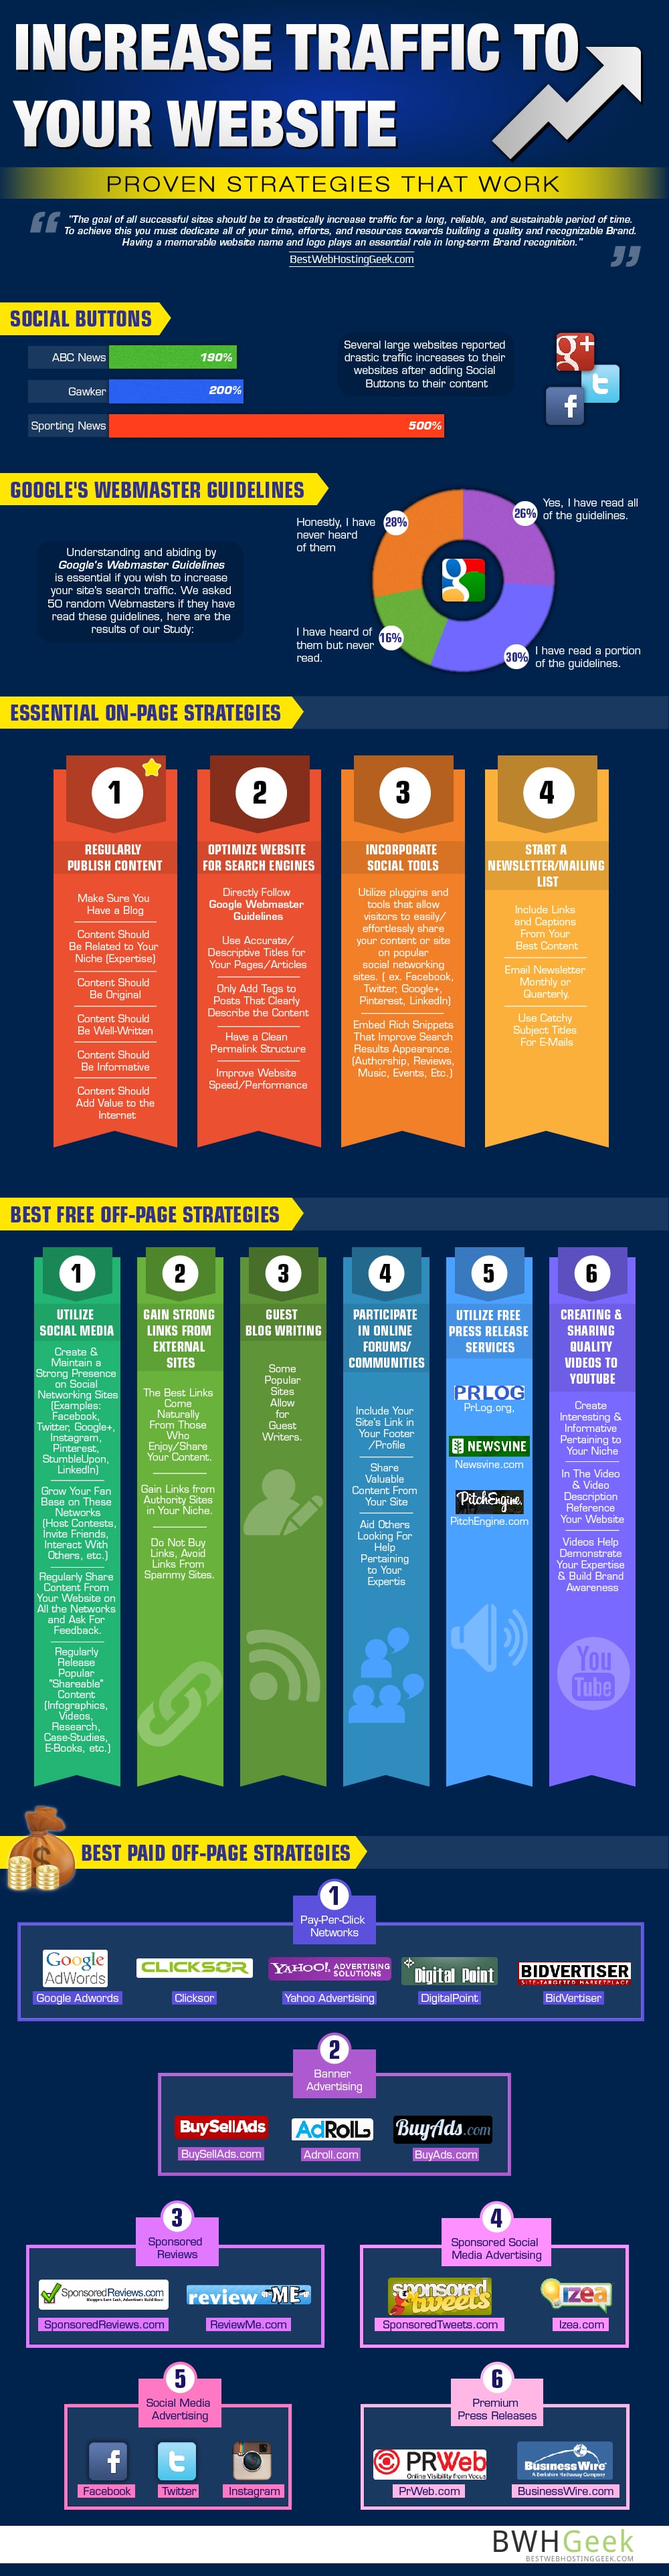 top-strategies-increase-traffic-infographic